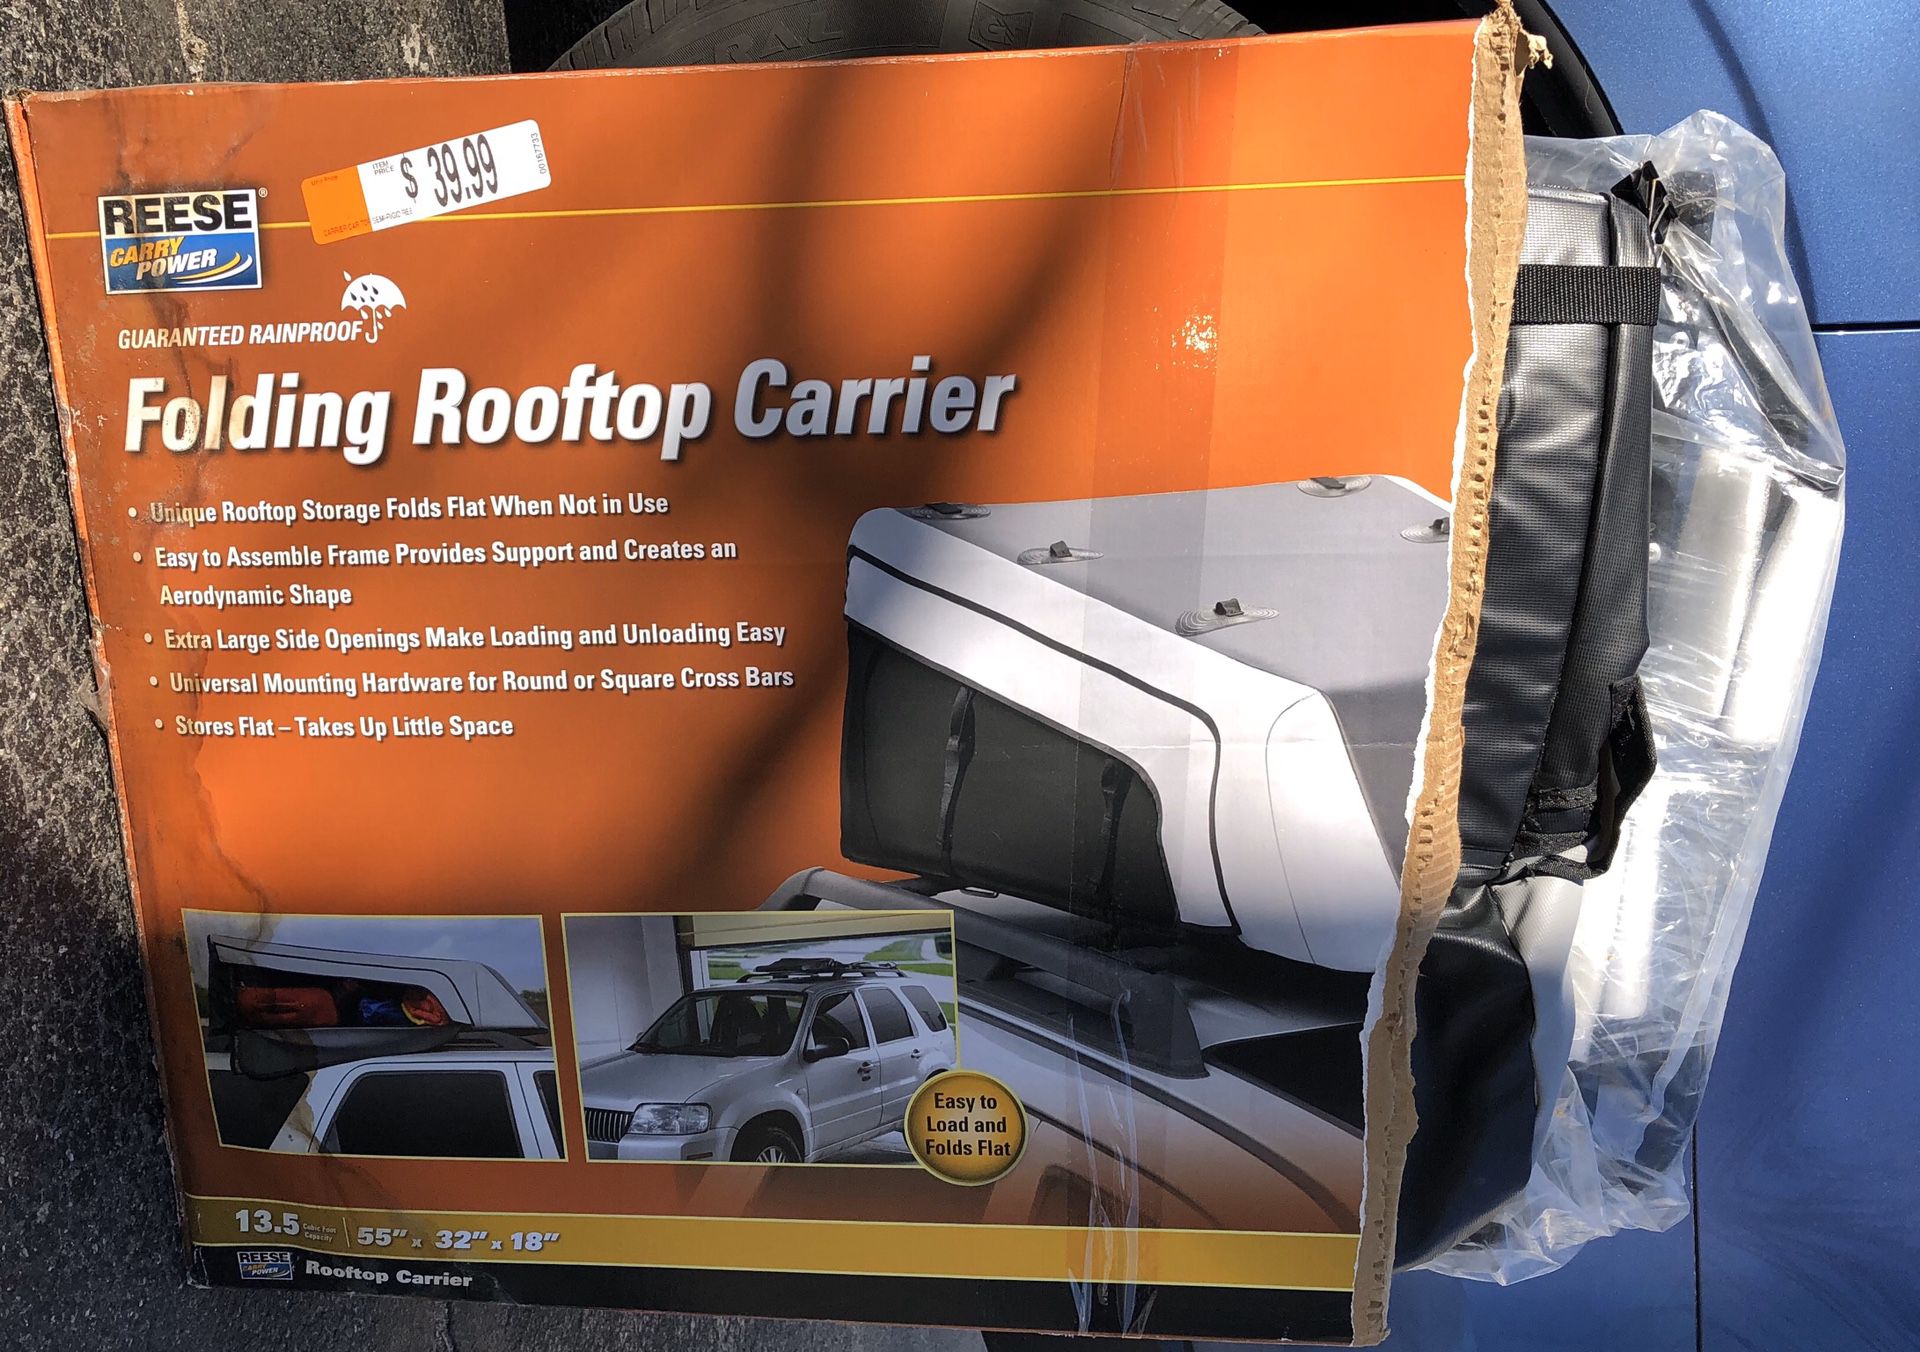 Folding Rooftop Carrier